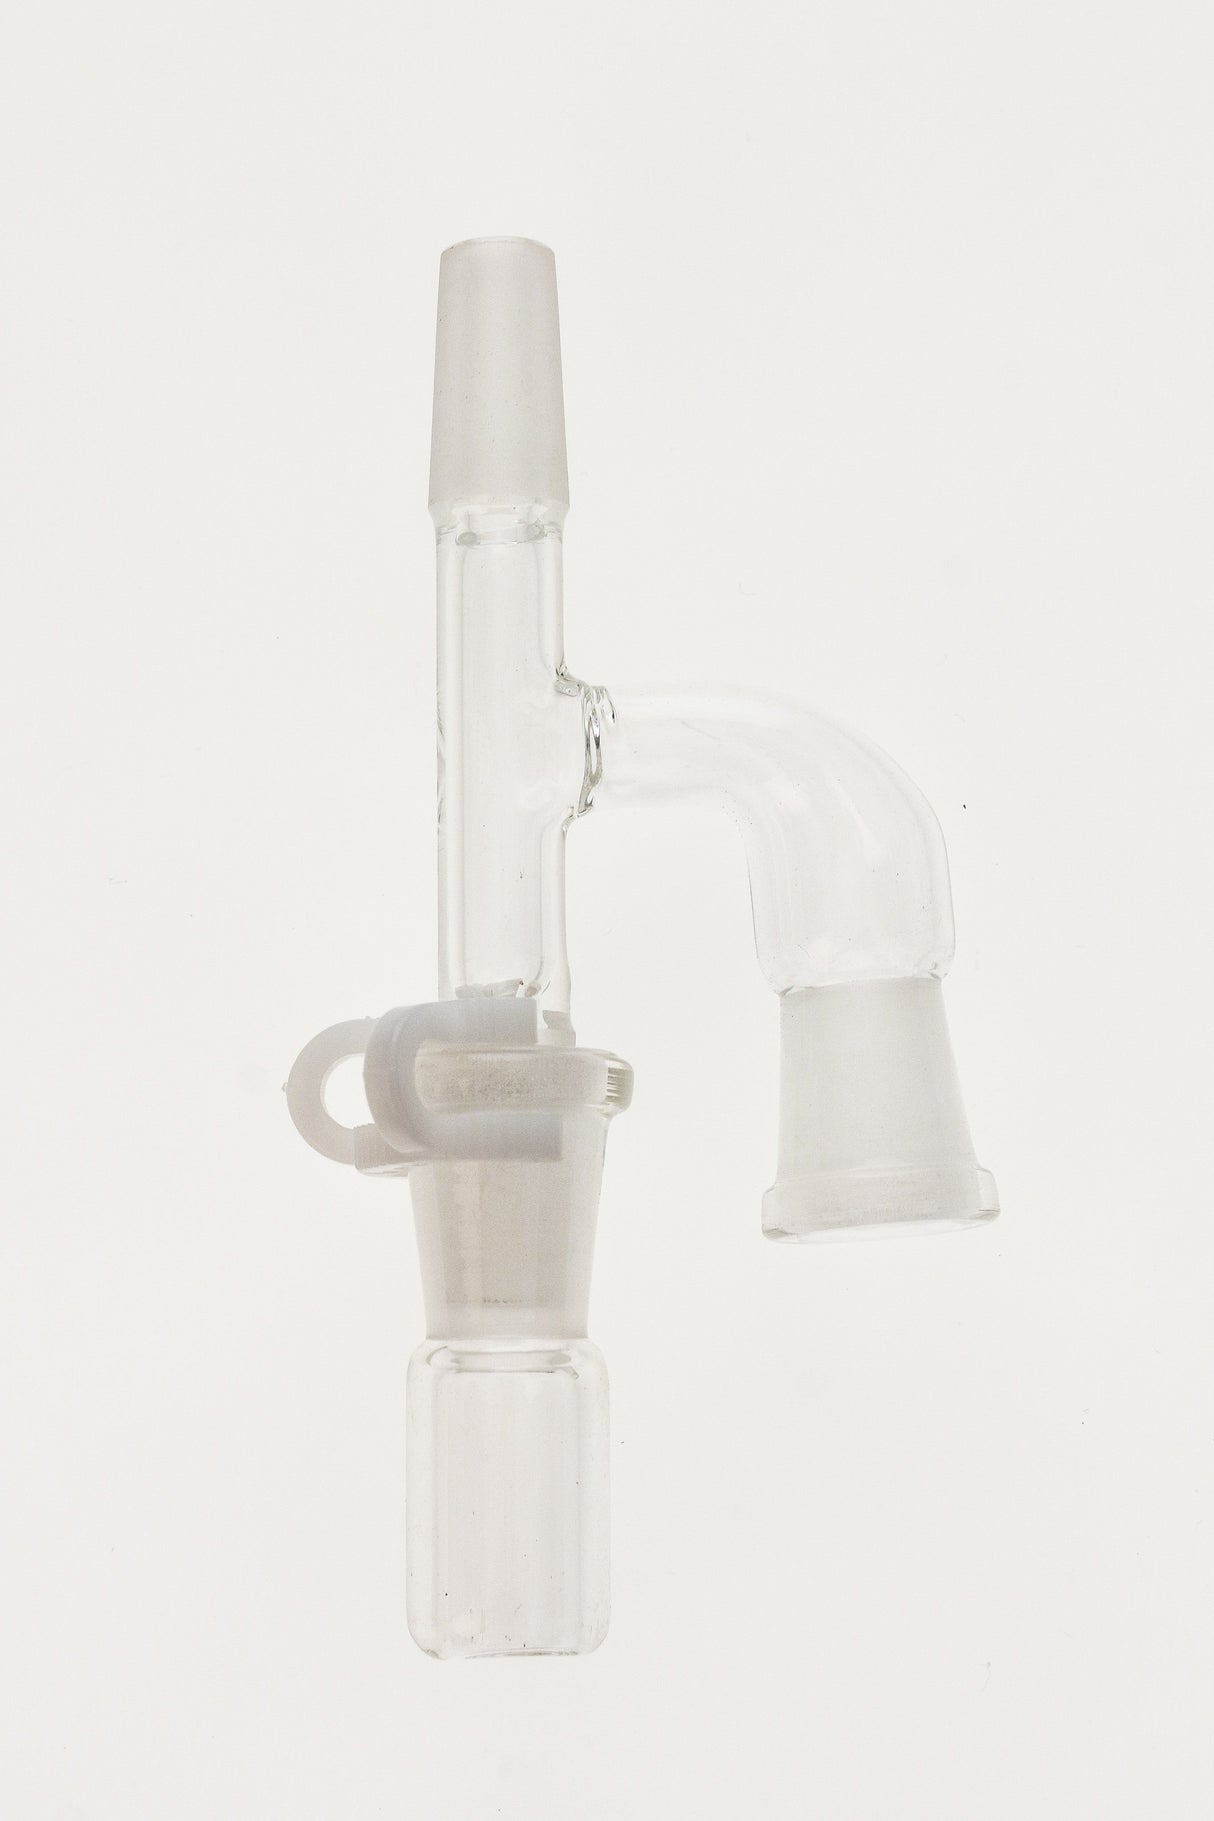 TAG Reclaim Adapter with Dish & Clip for Bongs, Female Joint, Clear Glass, Front View